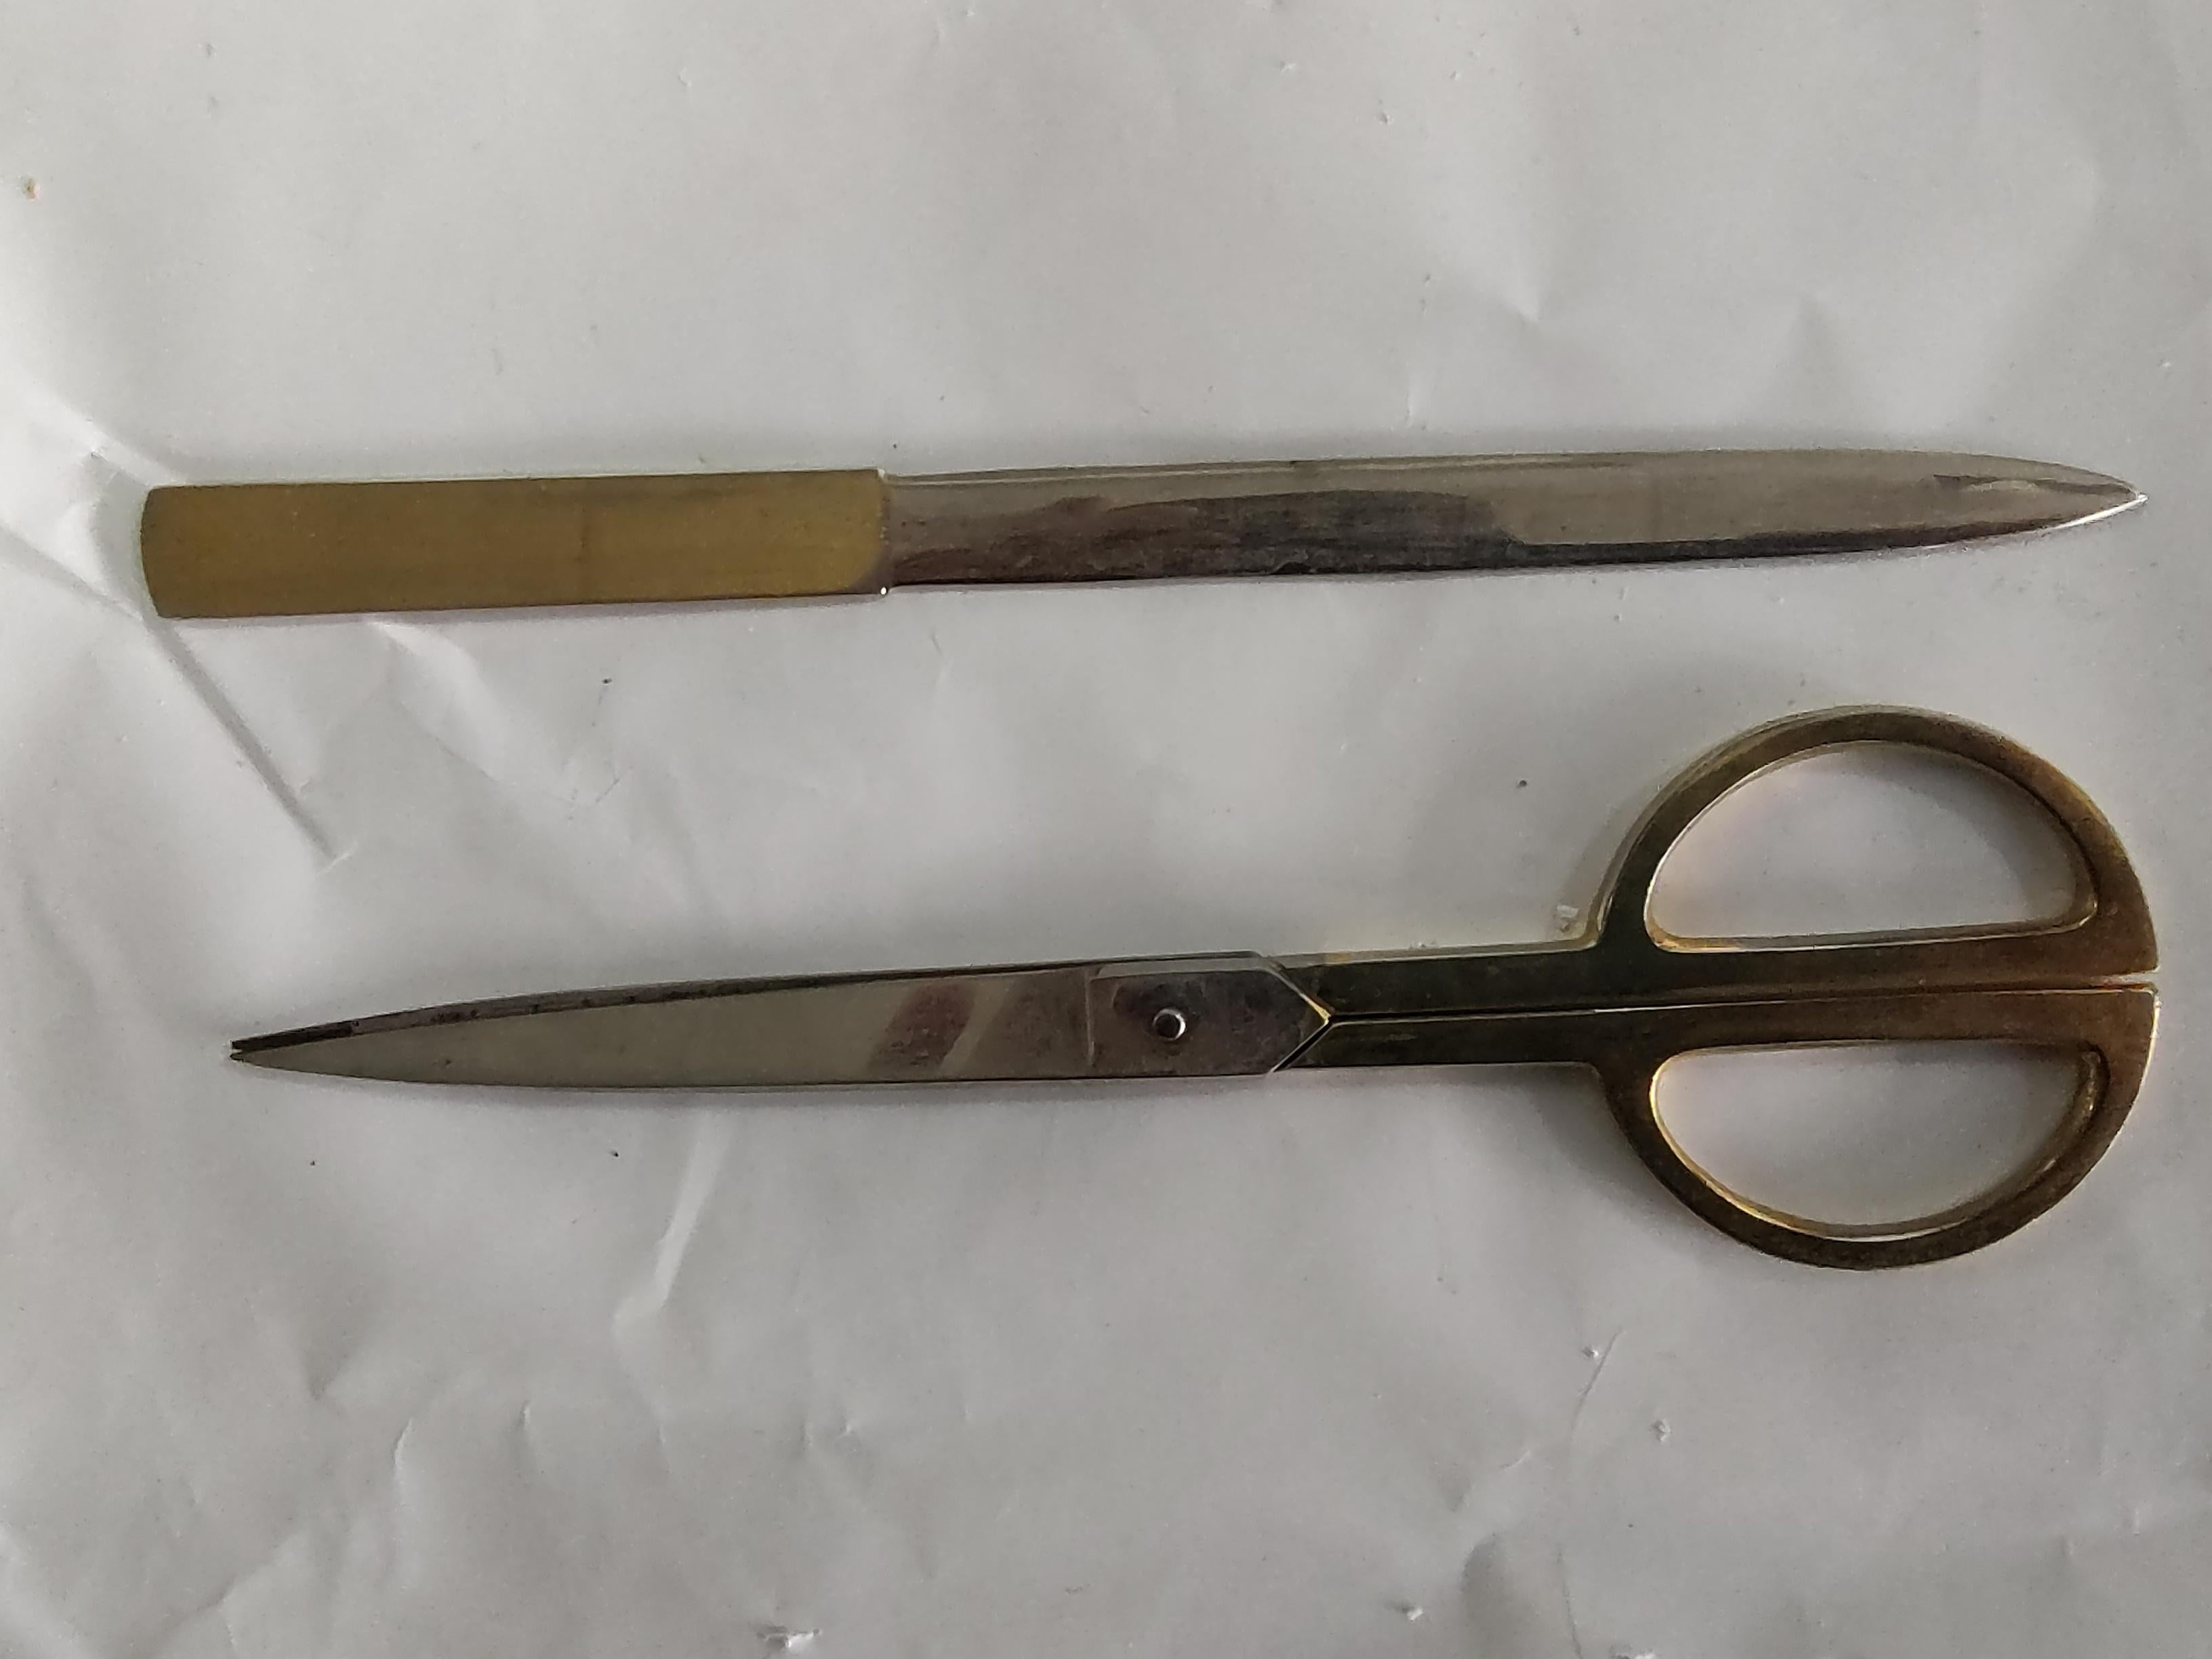 Fabulous set of a scissors and a letter opener in a leather bound case.
Made in Italy from the sixties. In excellent vintage condition with minimal wear.